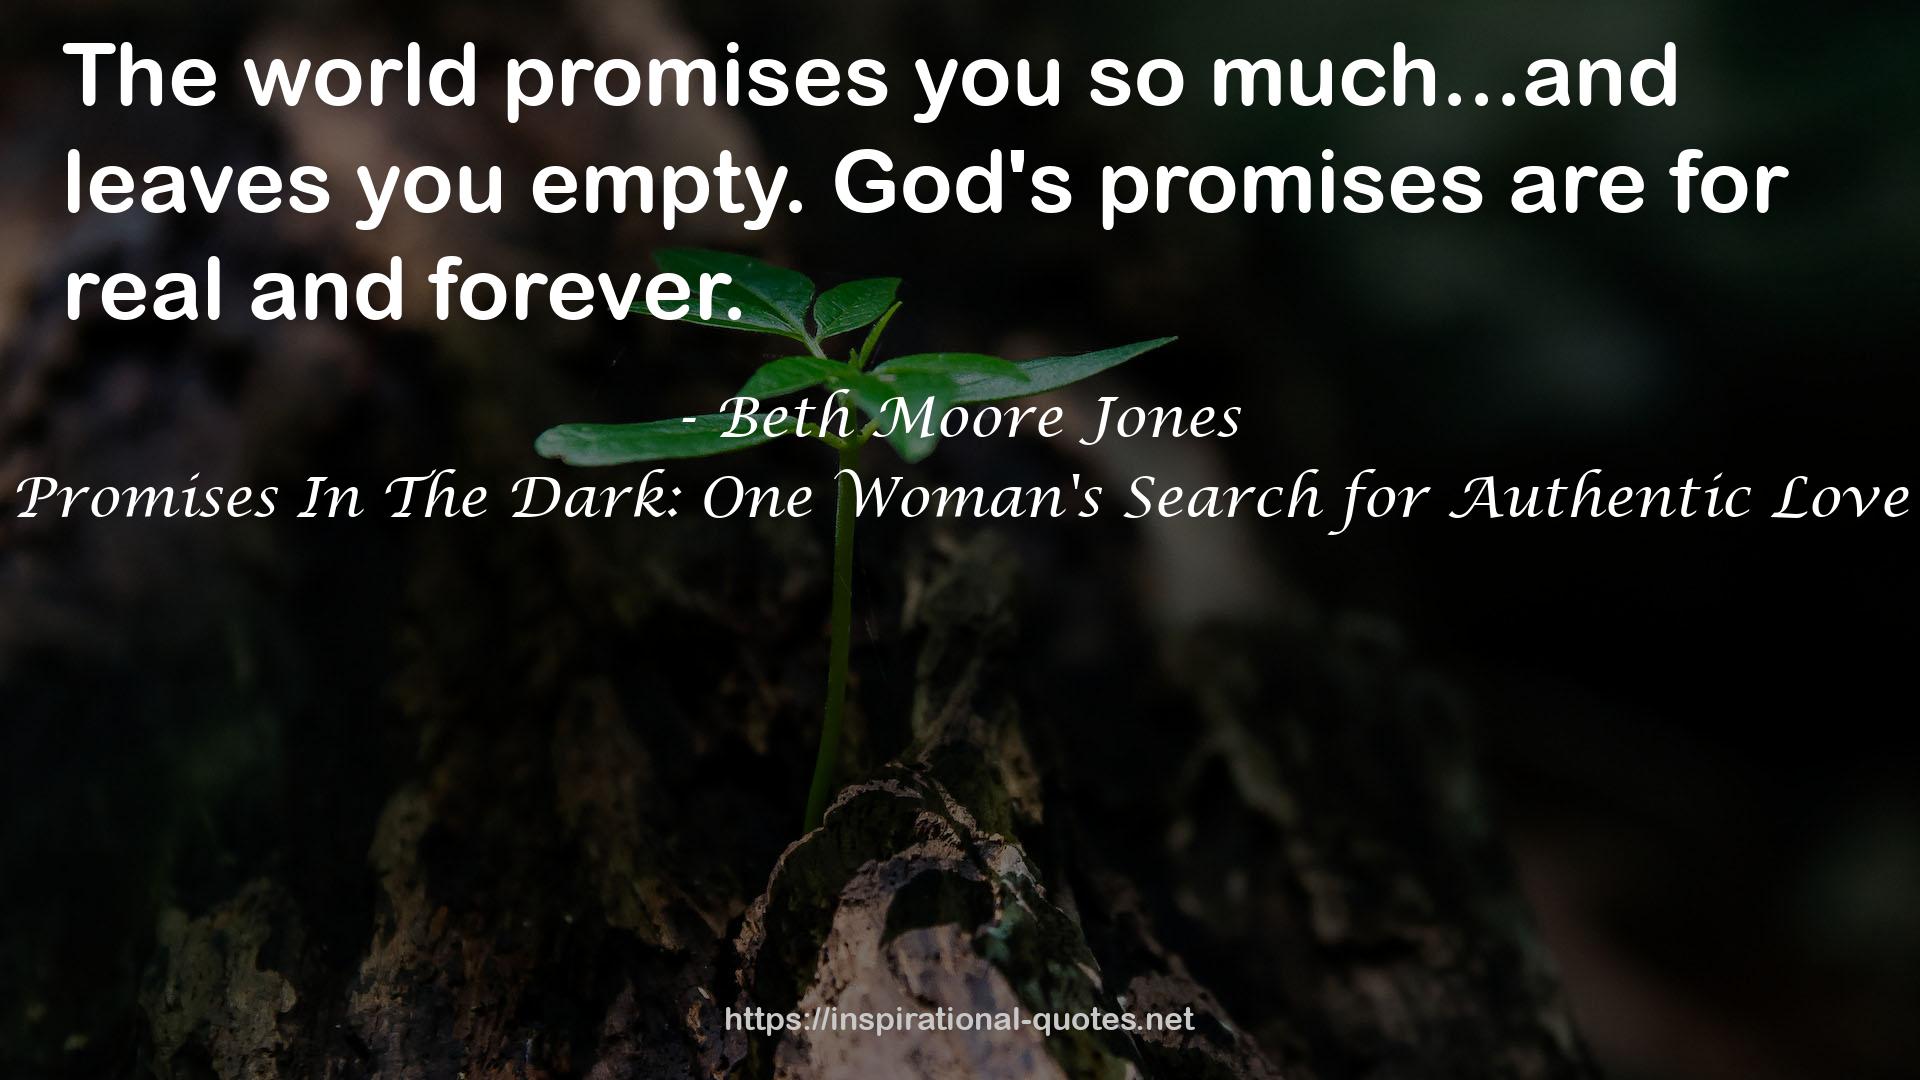 Promises In The Dark: One Woman's Search for Authentic Love QUOTES